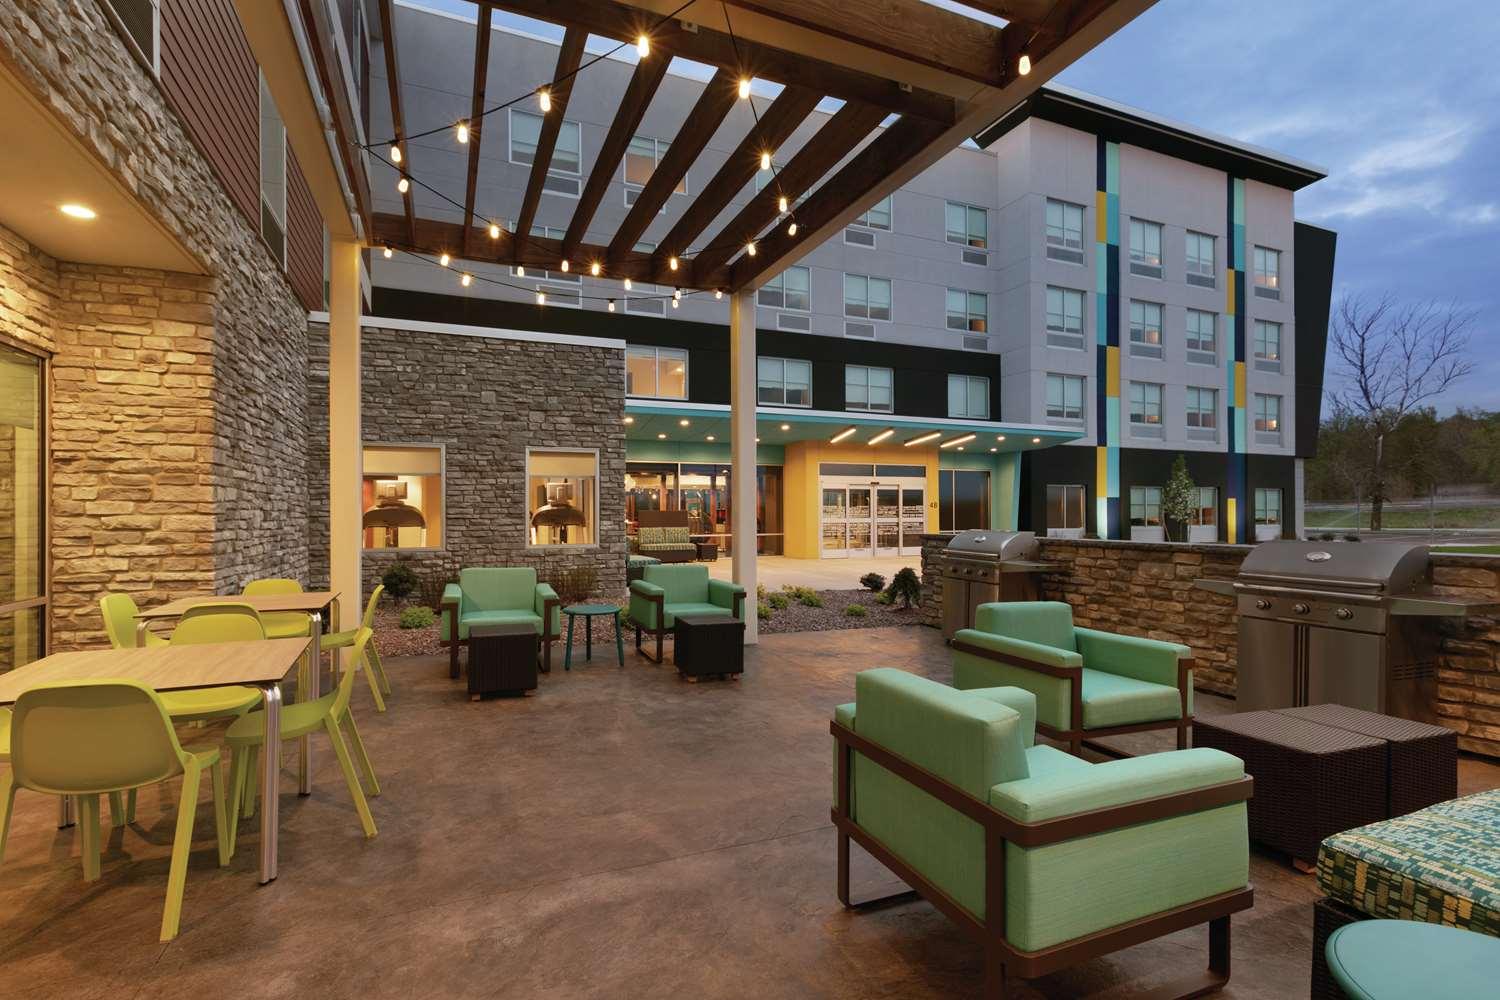 Home2 Suites by Hilton Williamsville Buffalo Airport in Buffalo, NY